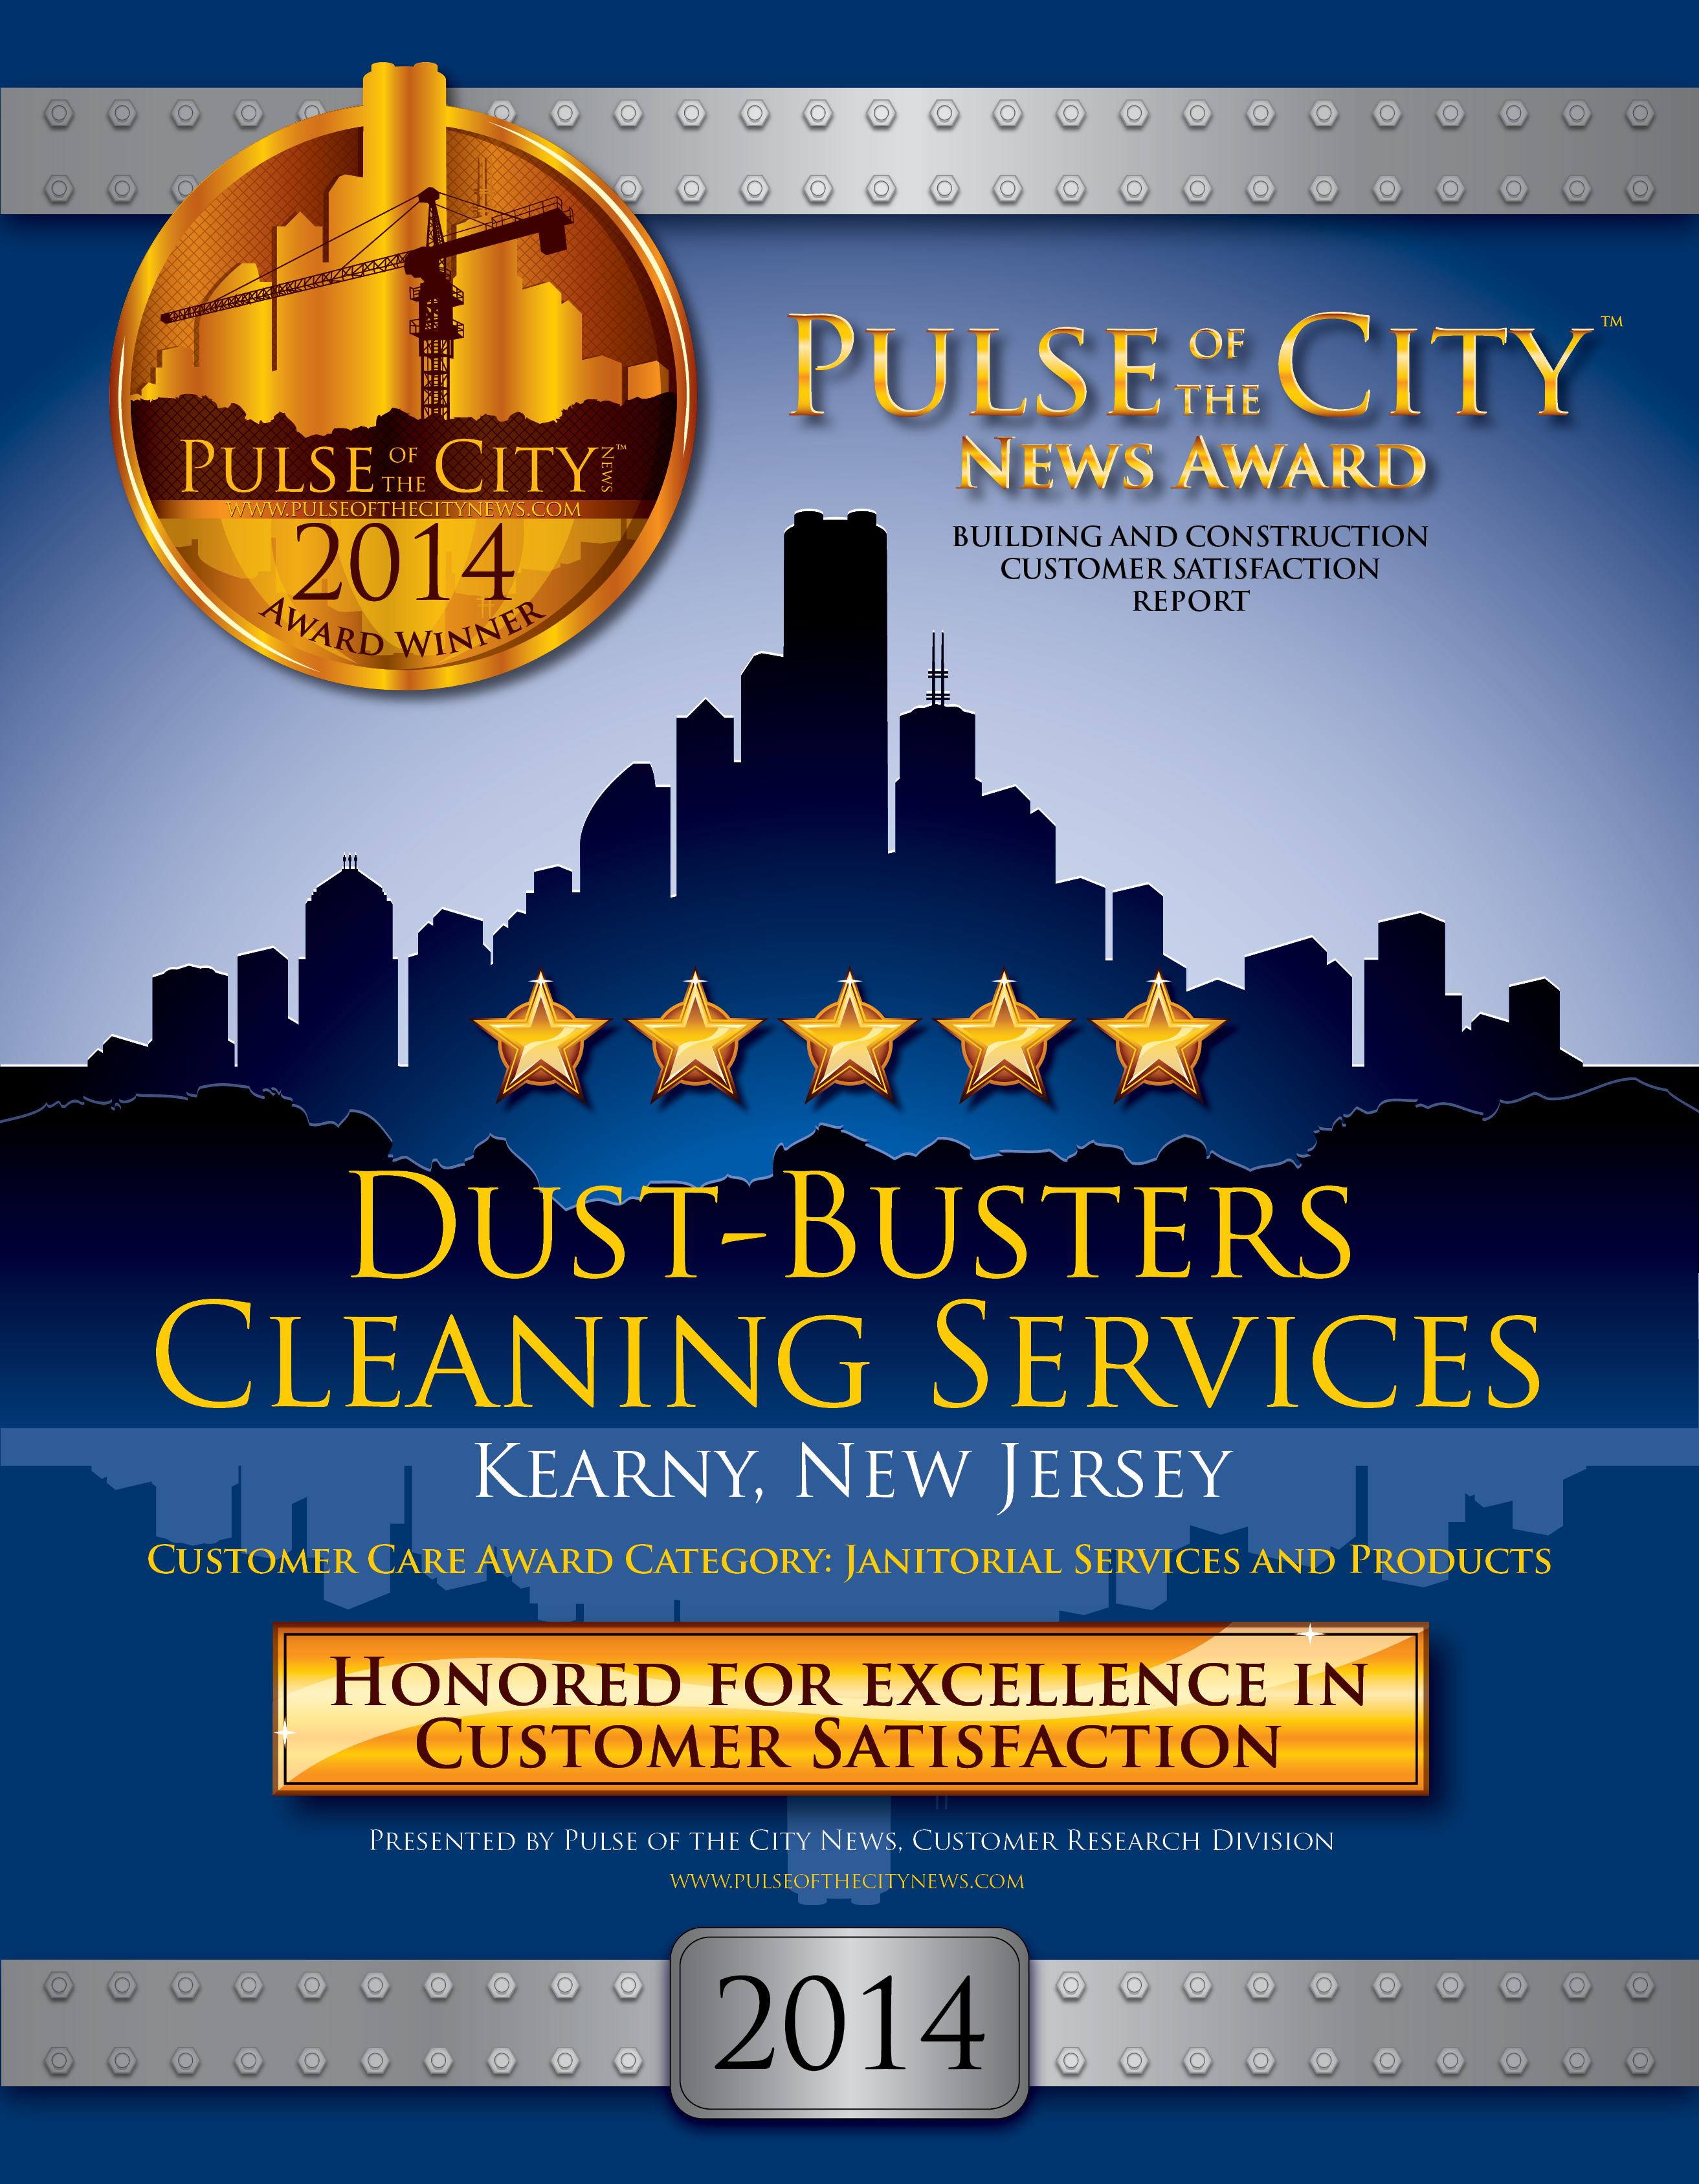 dust-busters-cleaning-services-2014.jpg